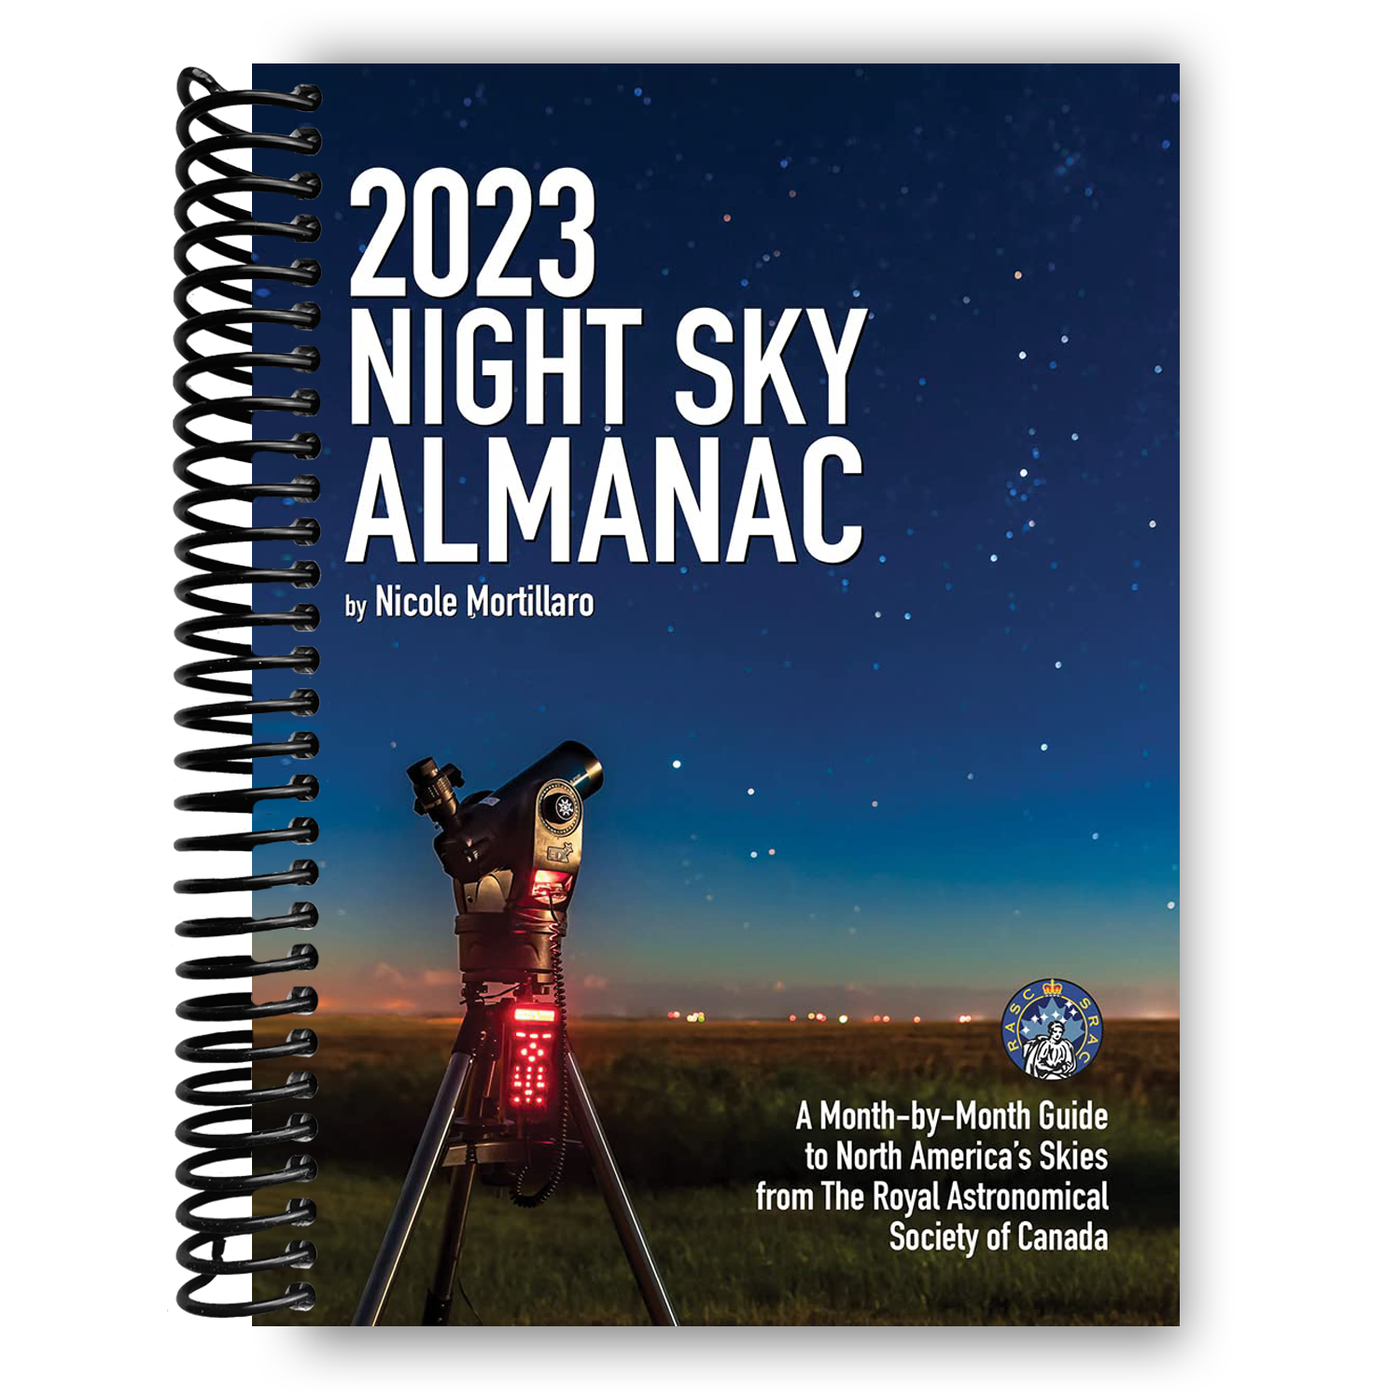 2023 Night Sky Almanac: A Month-by-Month Guide to North America's Skies from the Royal Astronomical Society of Canada (Spiral Bound)